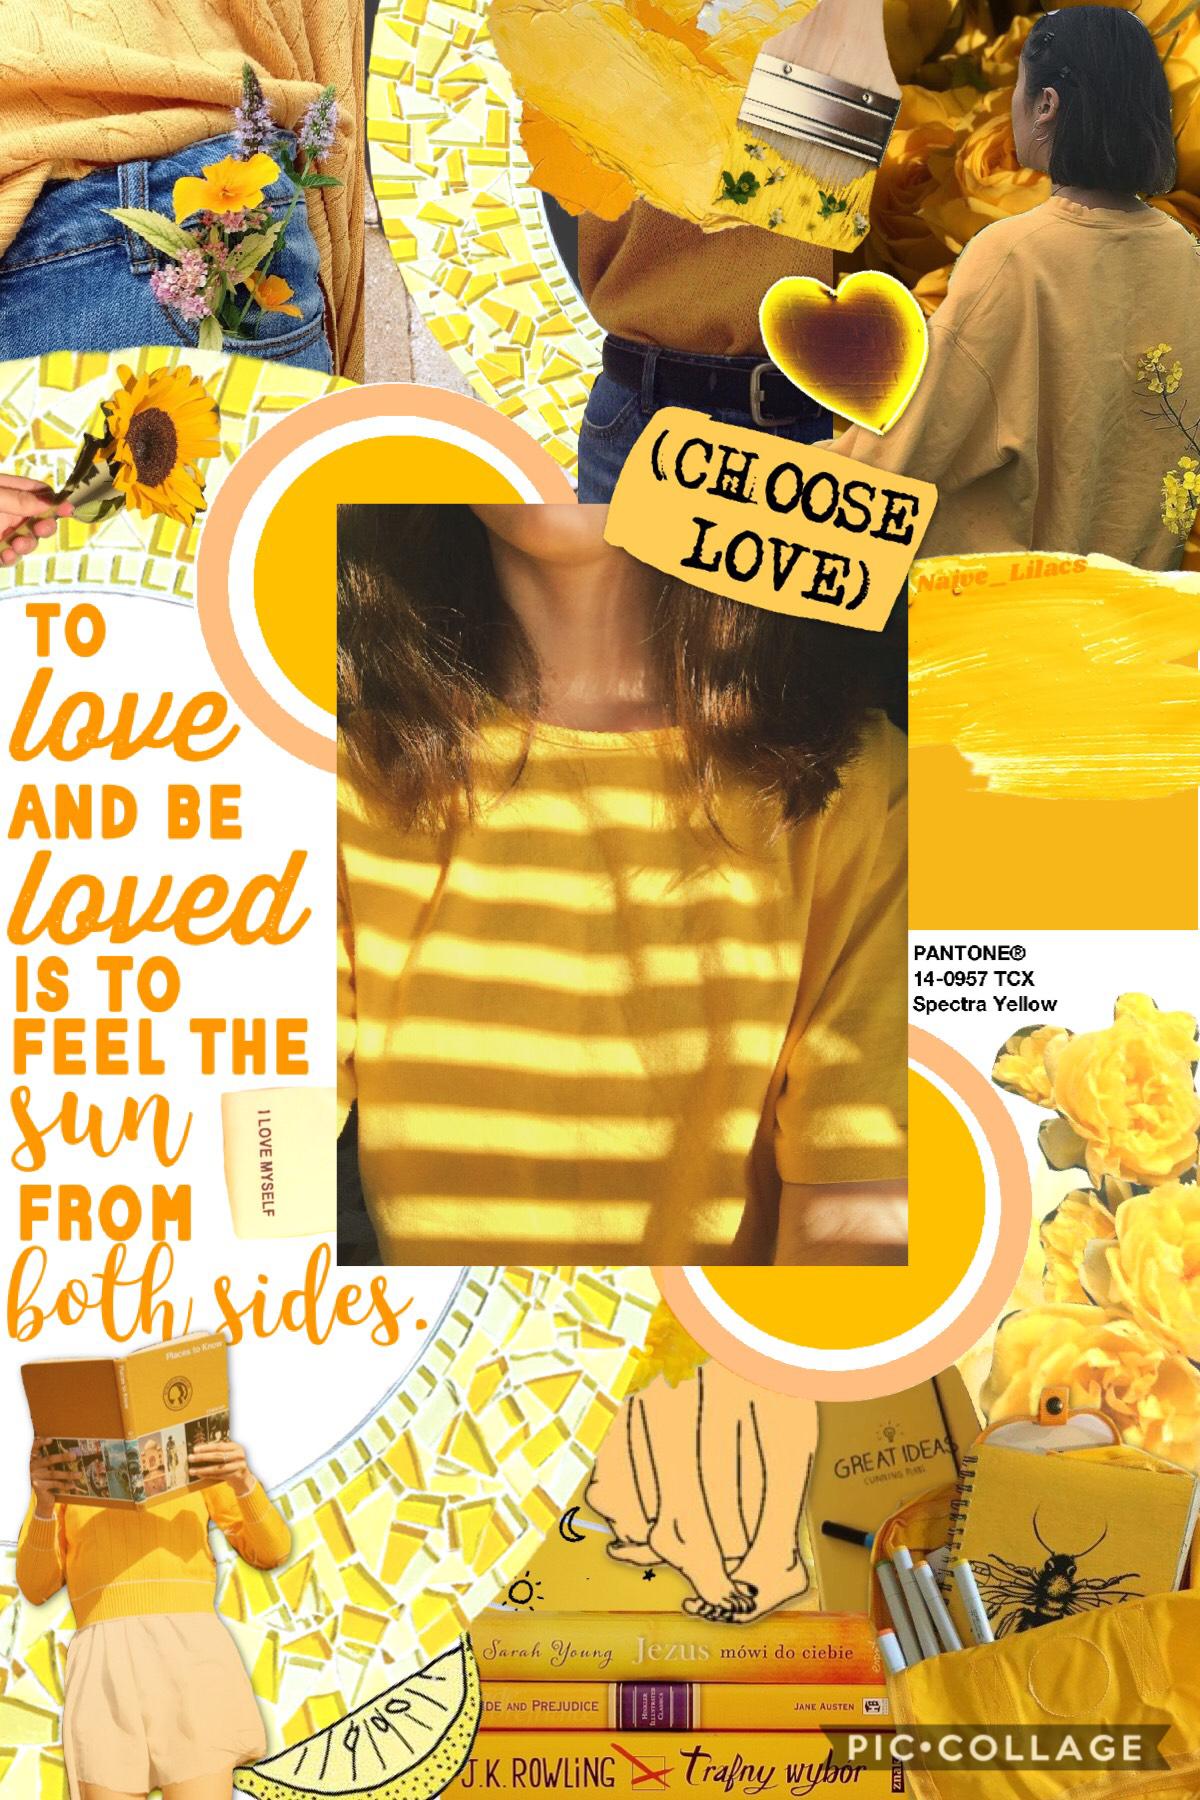 wow this took a while to make💛I made this on @ShatteredCrystal’s phone😊I’m pretty proud of this🌼thoughts on this?💭